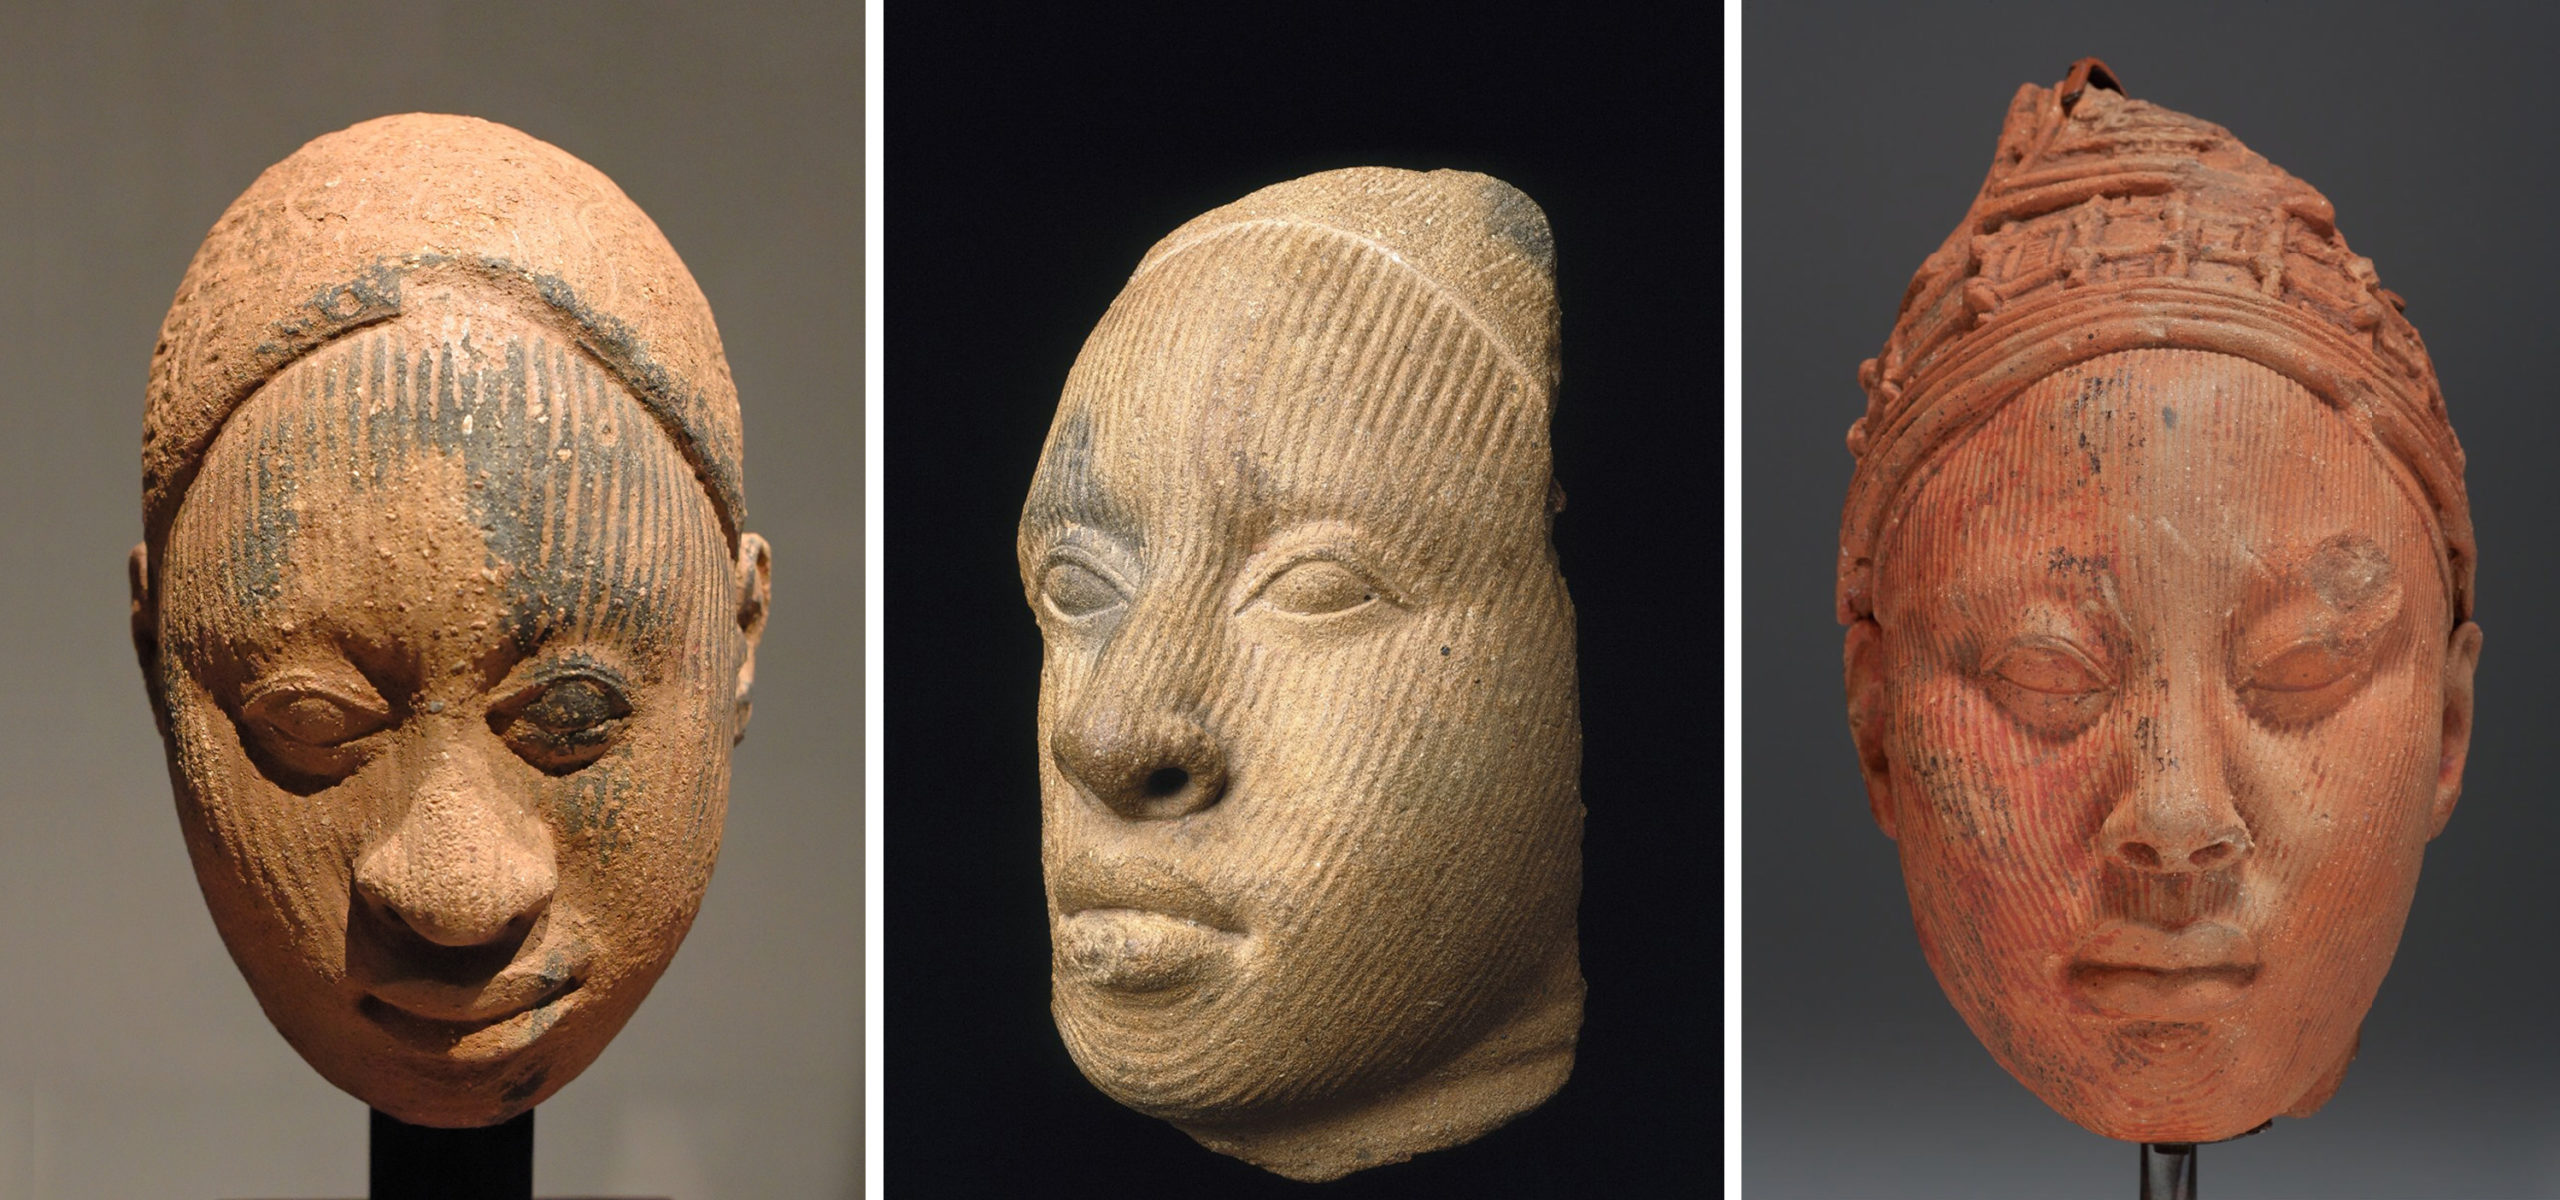 Left: Male figure, probably one of the king's servants, 12th–14th century, terracotta, 15.5 cm high, Ife, Nigeria (Louvre Museum); center: Fragment of a head, 1100–1500, terracotta, 15.2 x 8.3 x 9.5 cm, Ife, Nigeria (Brooklyn Museum); right: Head, possibly a King, 12th–14th century, terracotta, 26.7 x 14.5 x 18.7 cm (Kimbell Art Museum, Fort Worth)